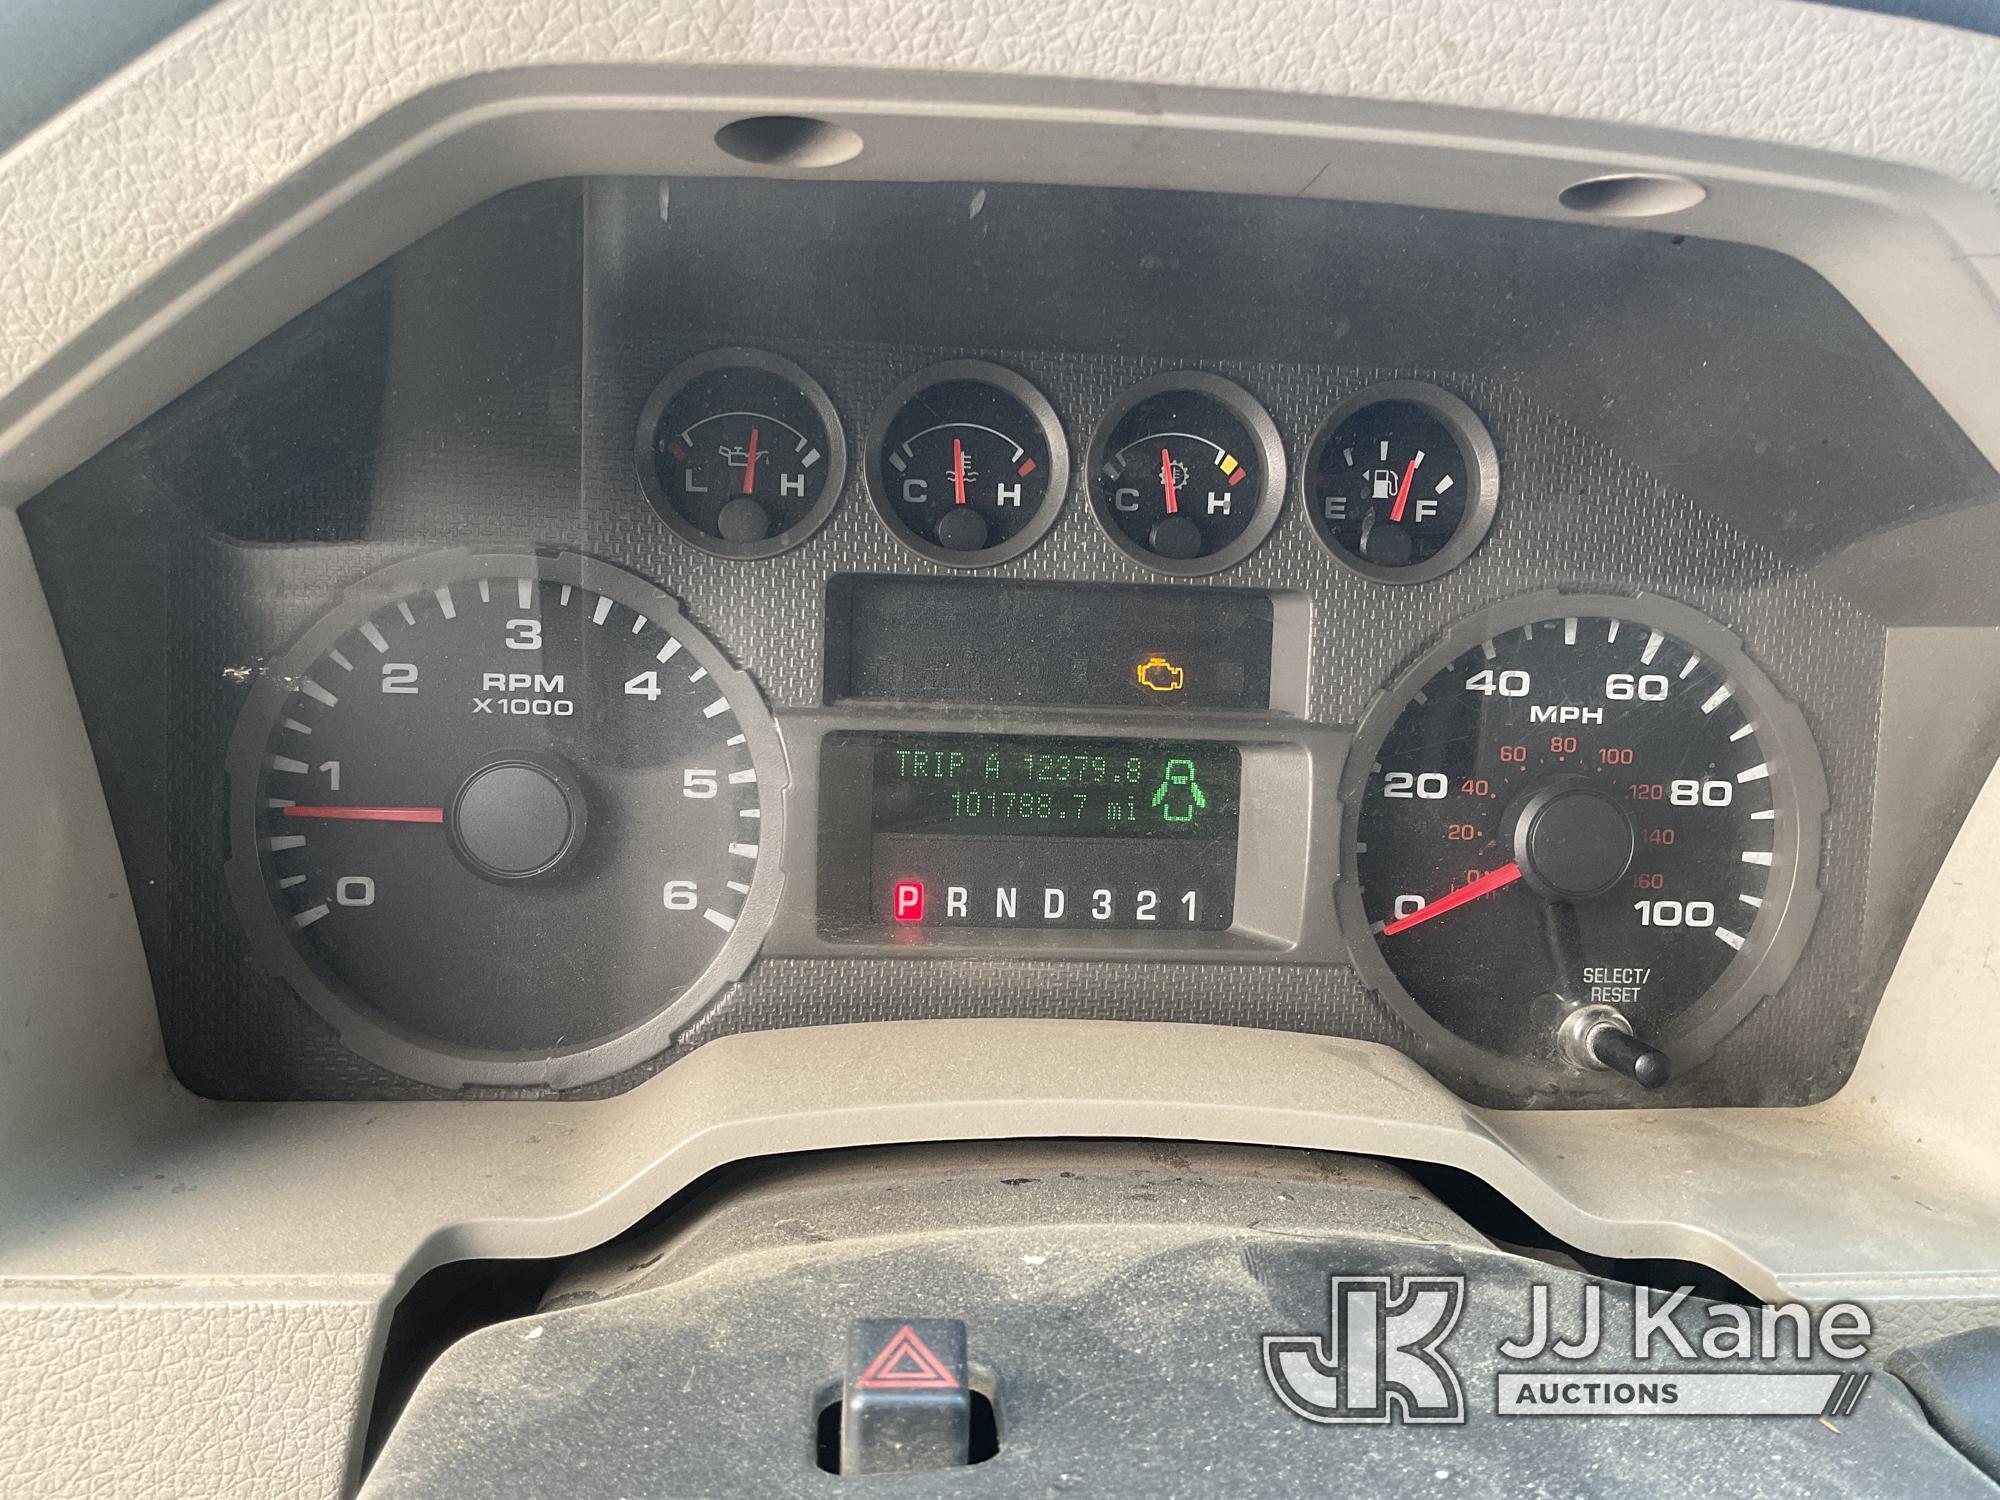 (Jurupa Valley, CA) 2008 Ford F-350 SD Utility Truck Runs & Moves, Check Engine Light Is On